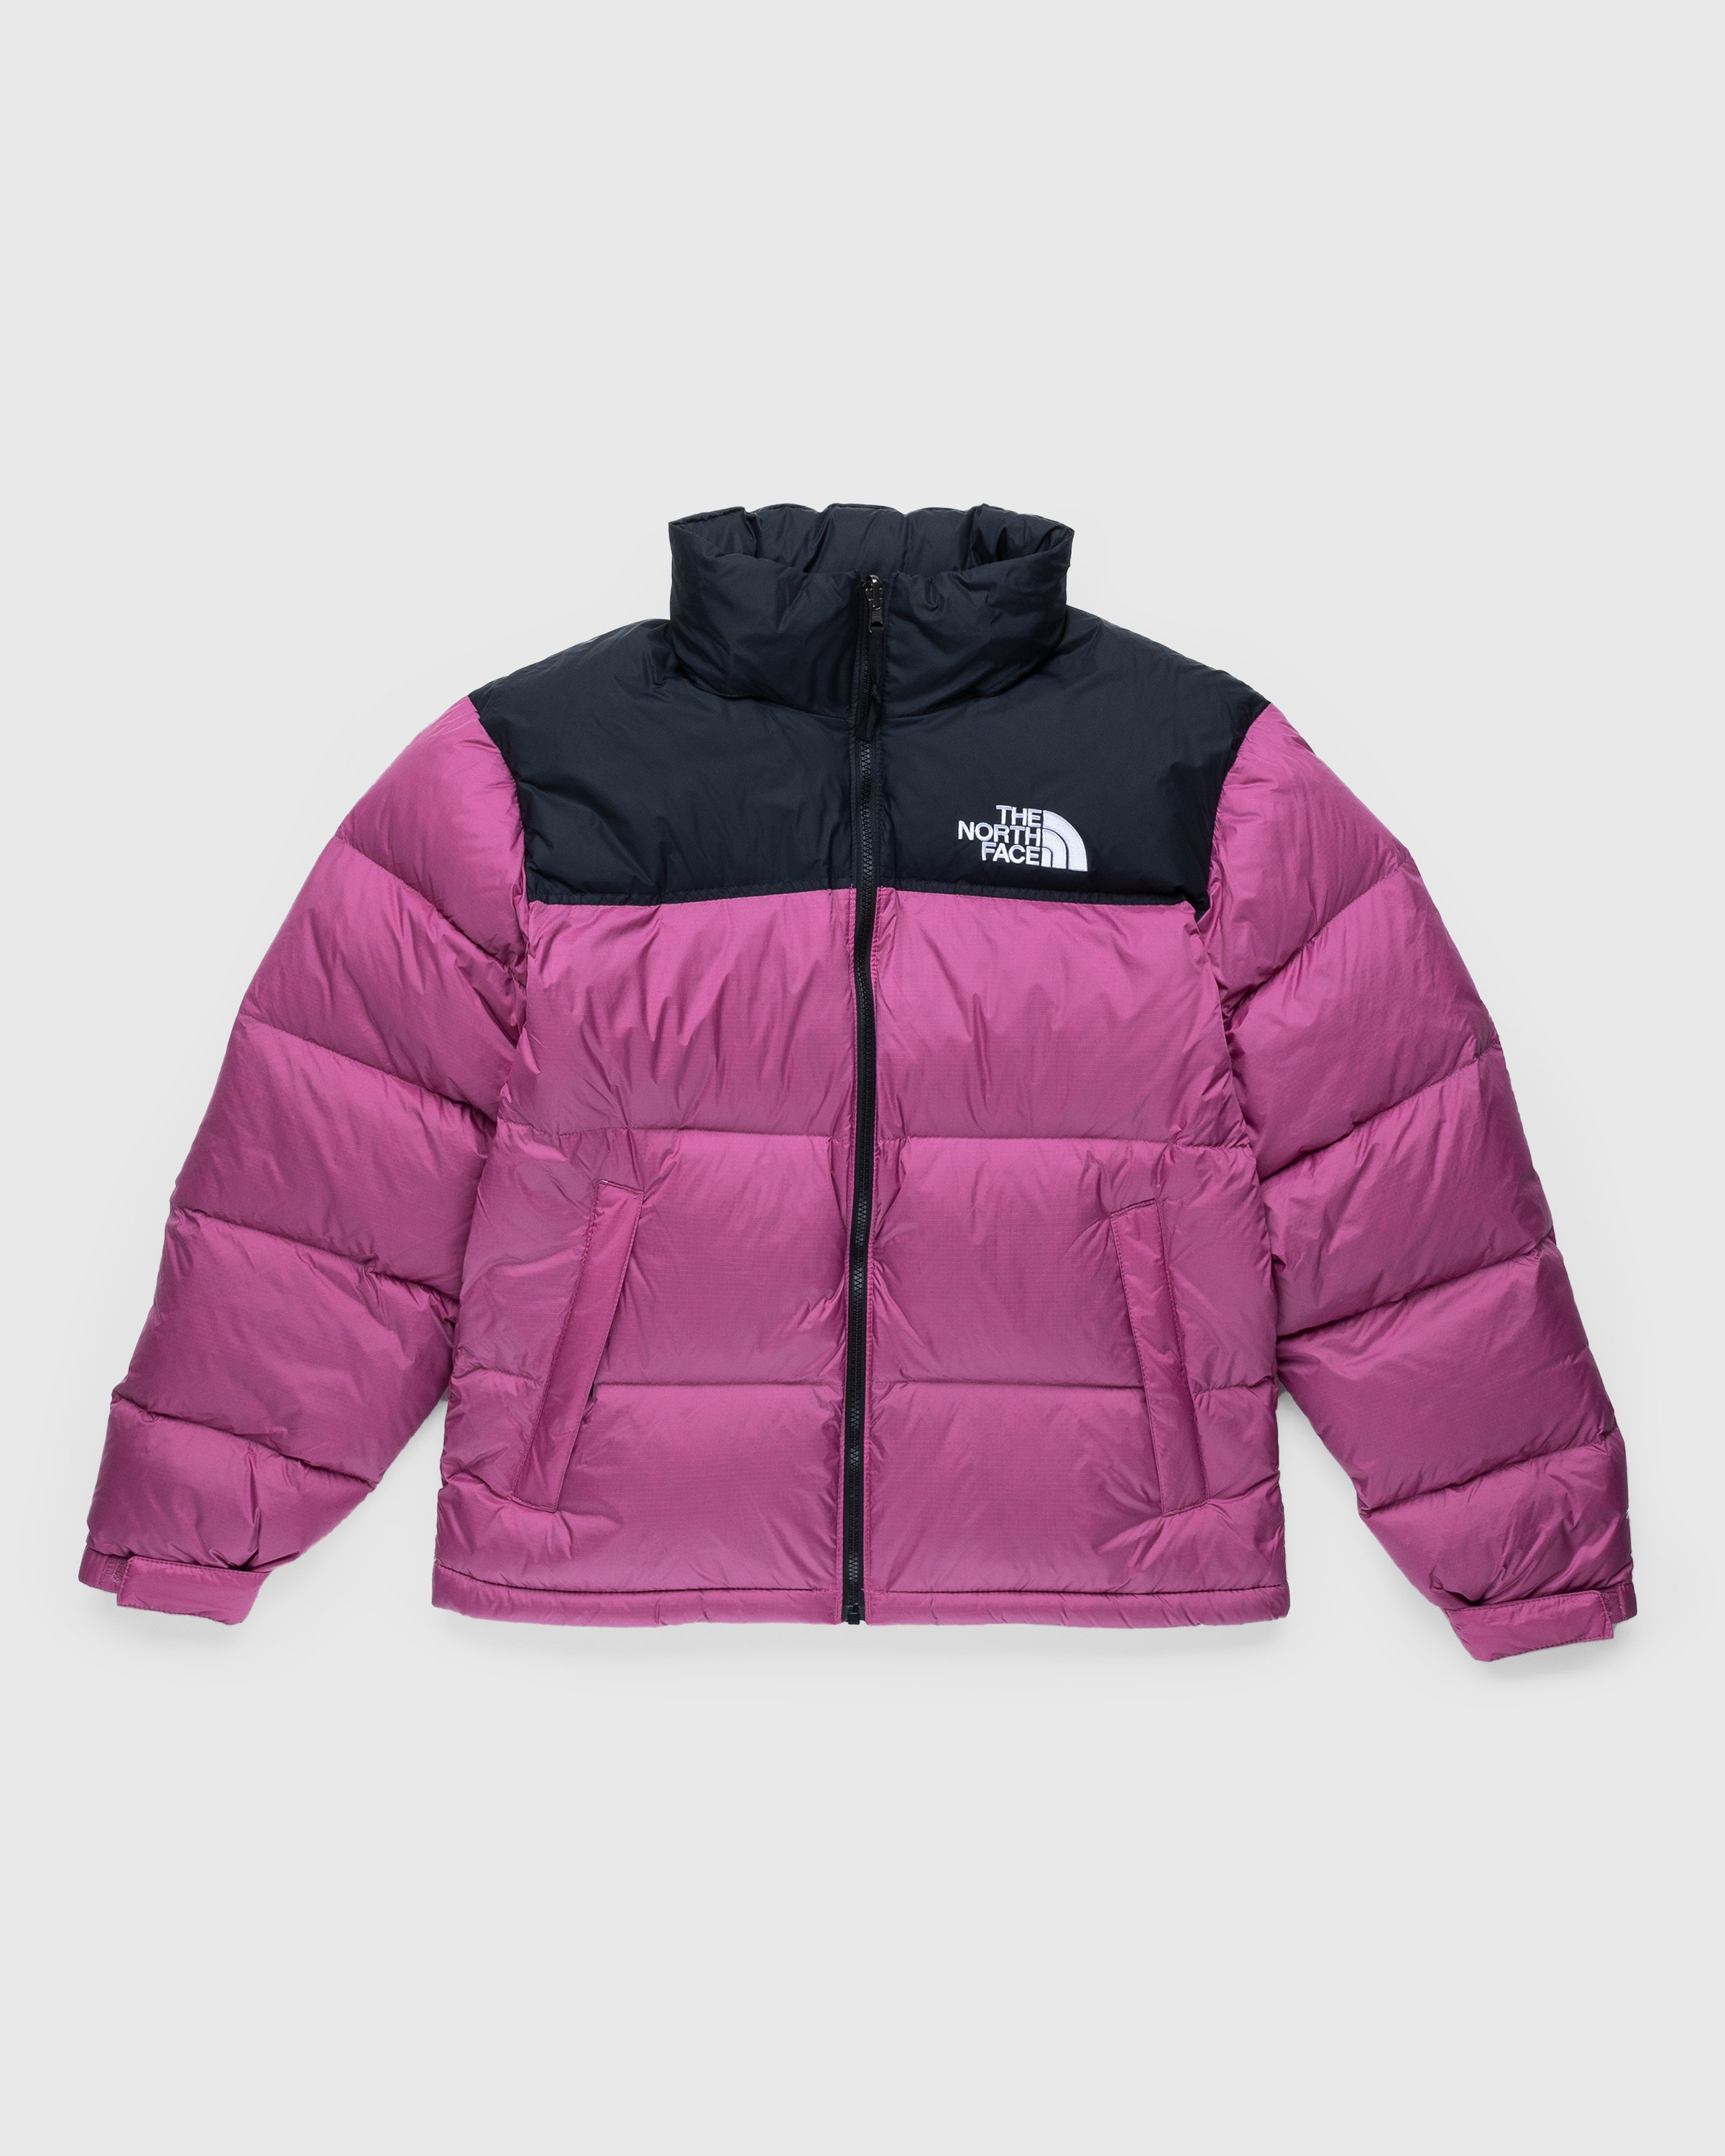 The North Face - 1996 Retro Nuptse Jacket Red - Clothing - Red - Image 1